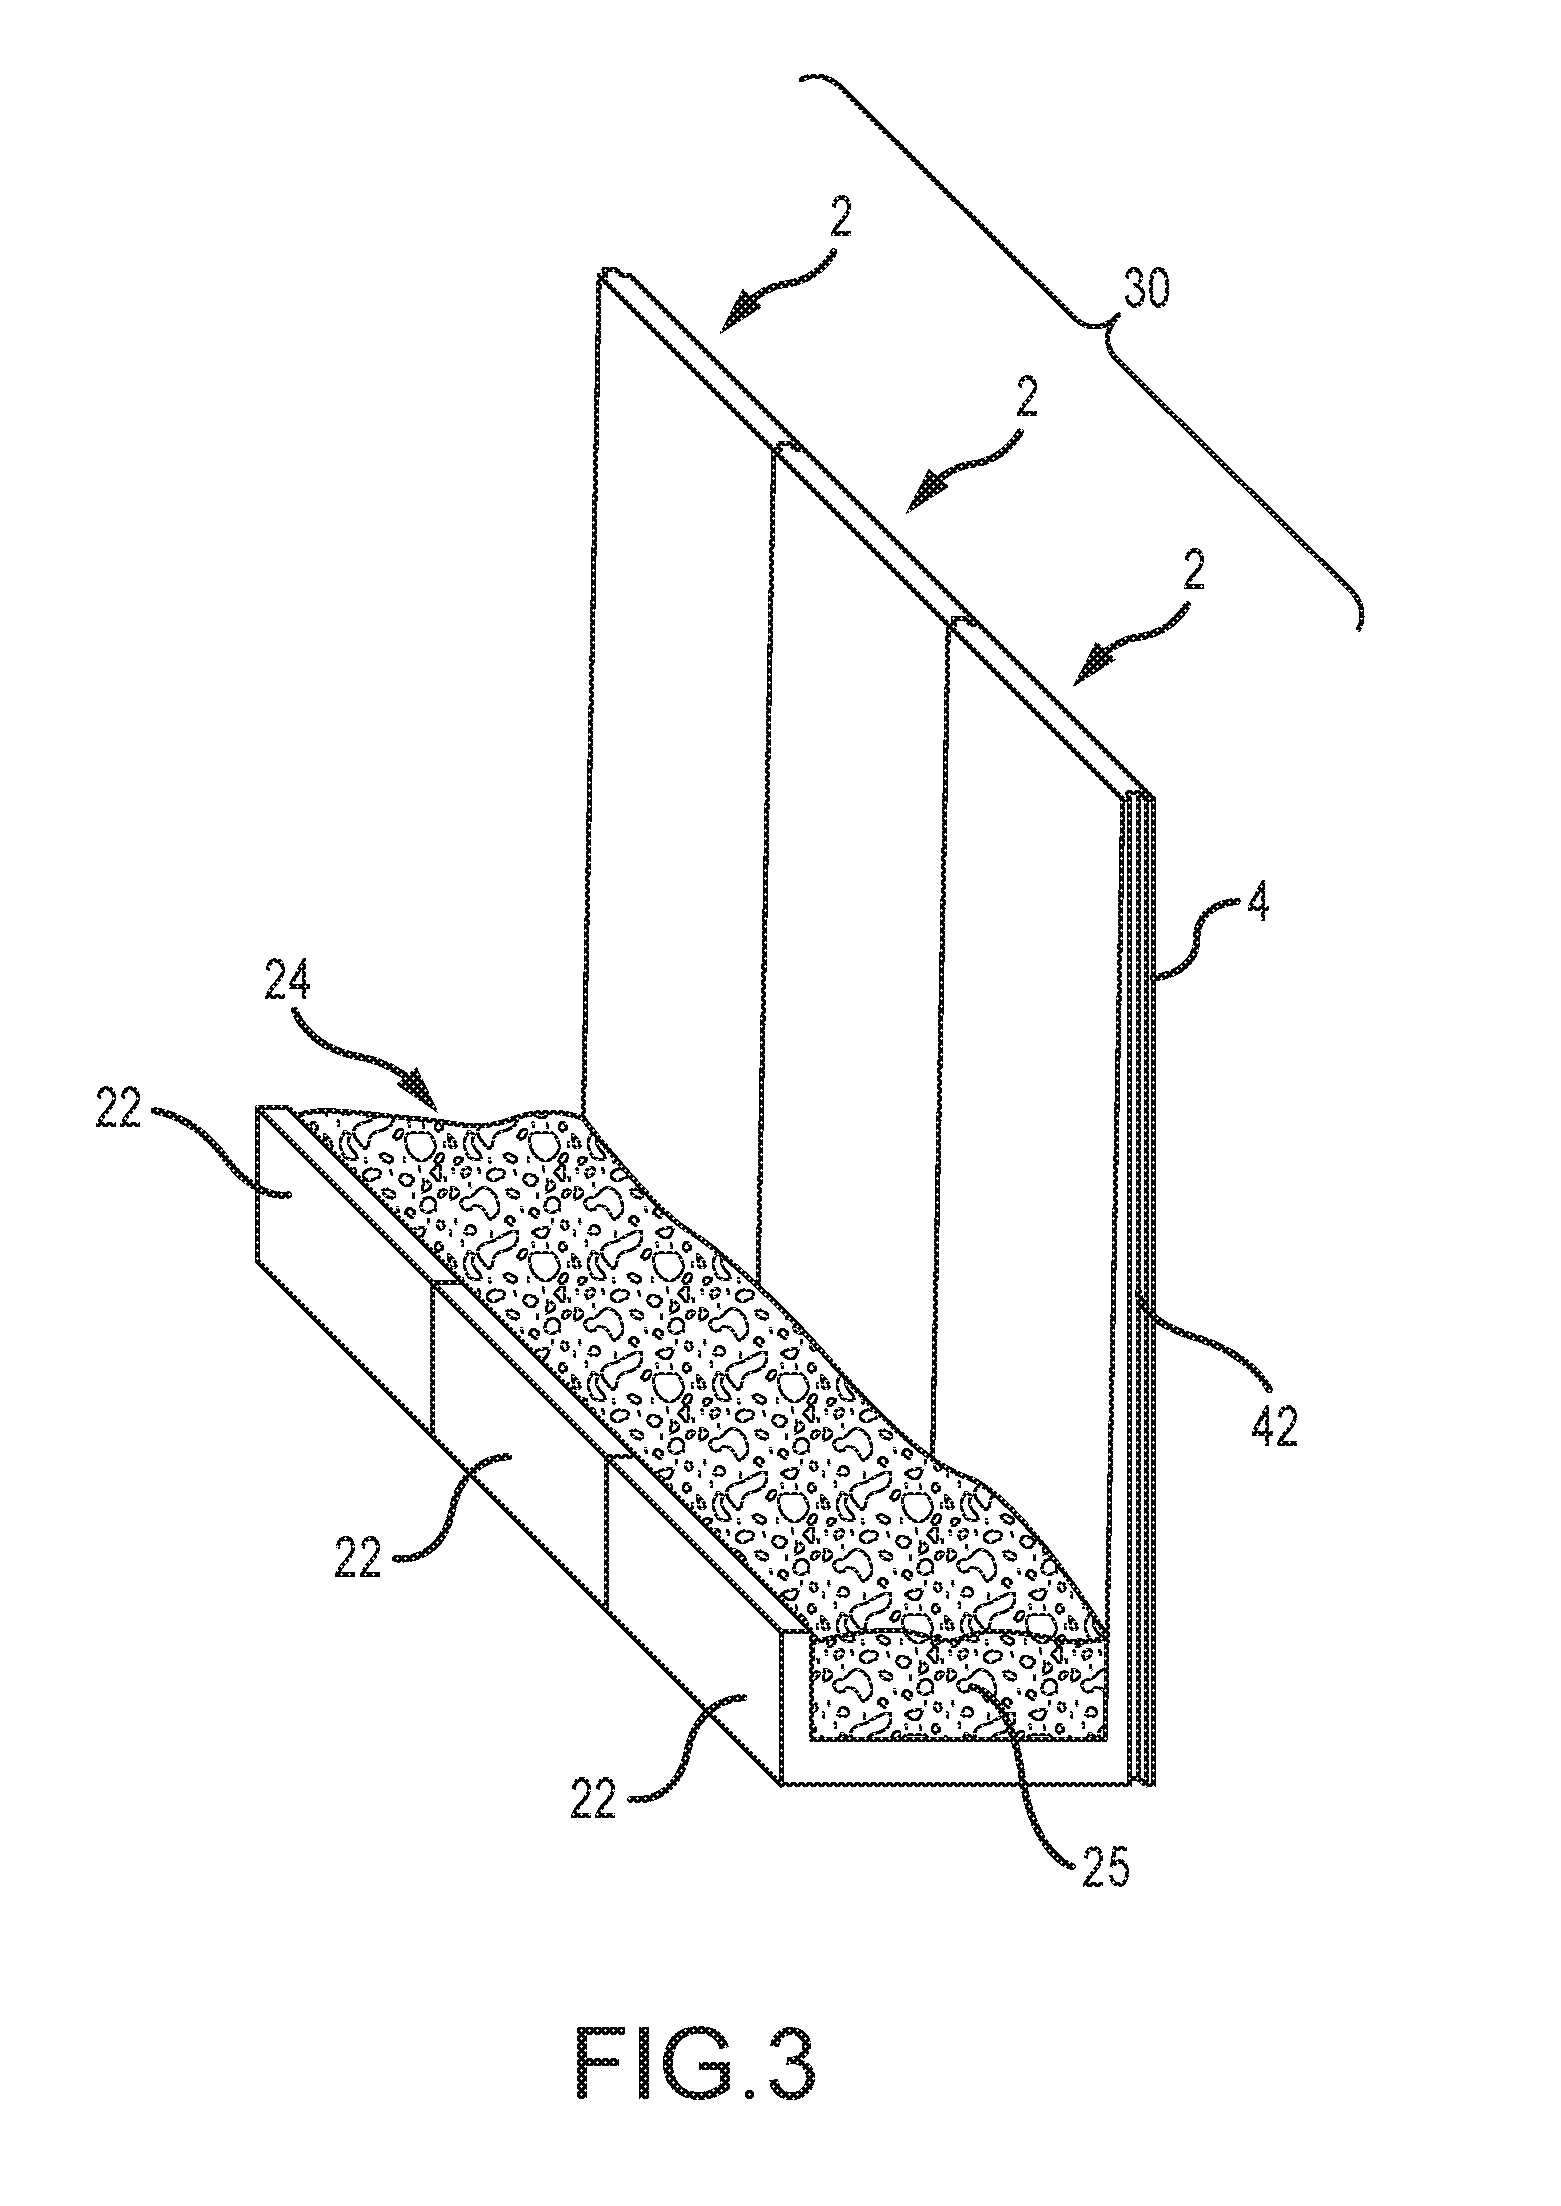 Precast concrete wall member and method of erecting the same